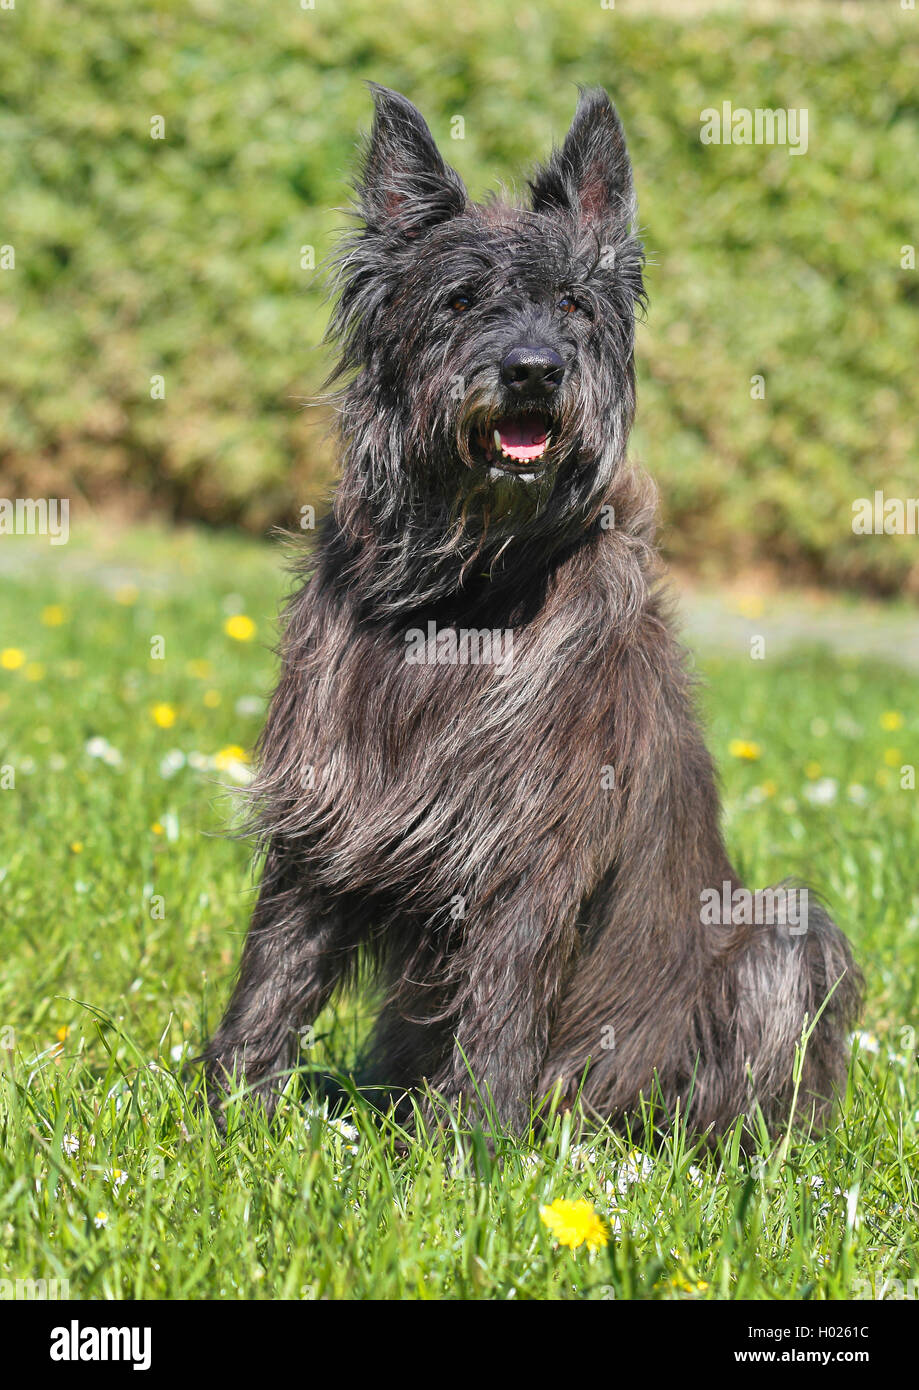 Berger de Picardie, Berger Picard (Canis lupus f. familiaris), seven years old male dog sitting in a meadow, Germany Stock Photo